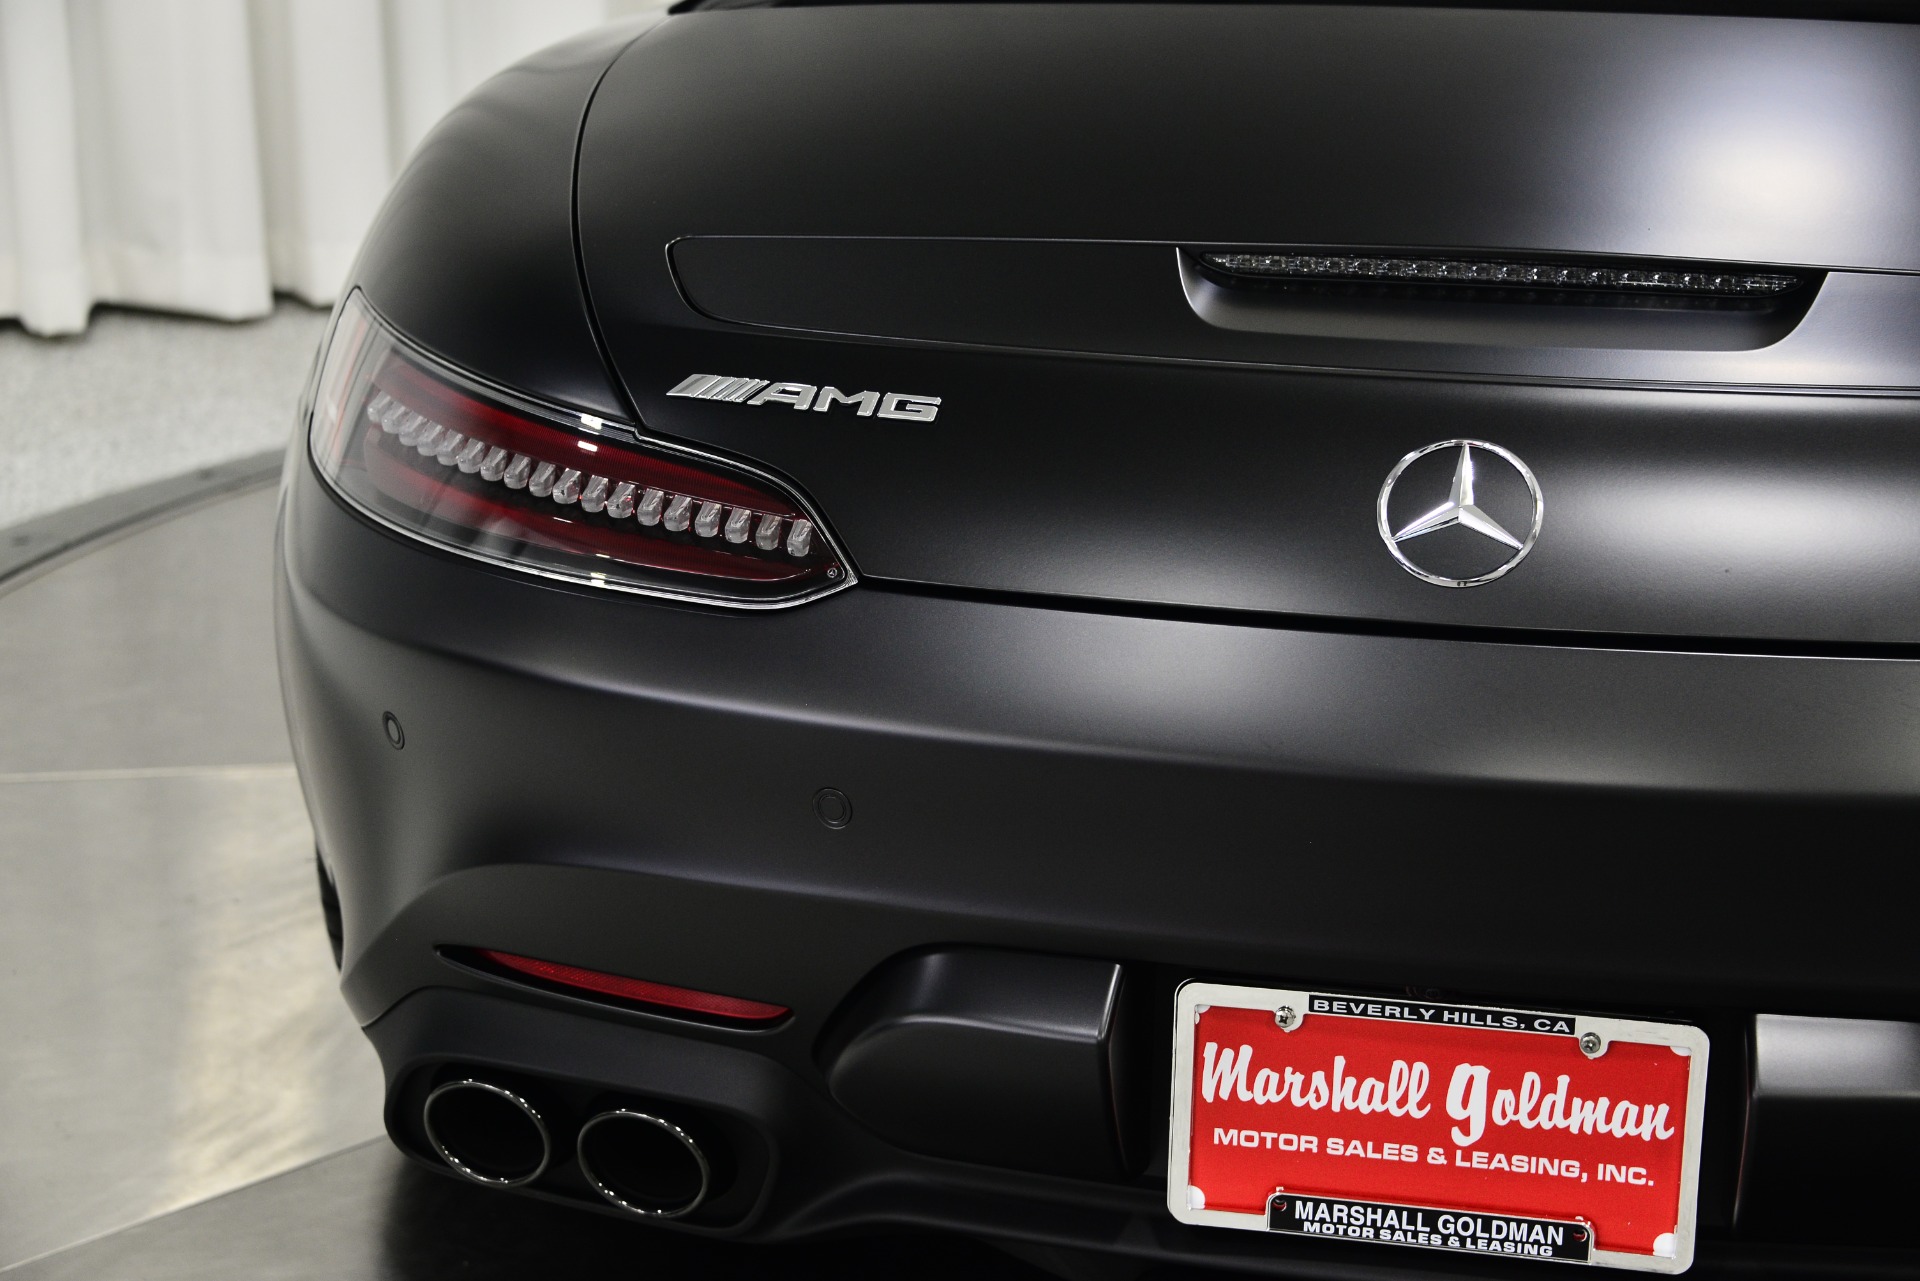 Meet the Sinister, Brabus-Tuned Mercedes-AMG GT S – News – Car and Driver